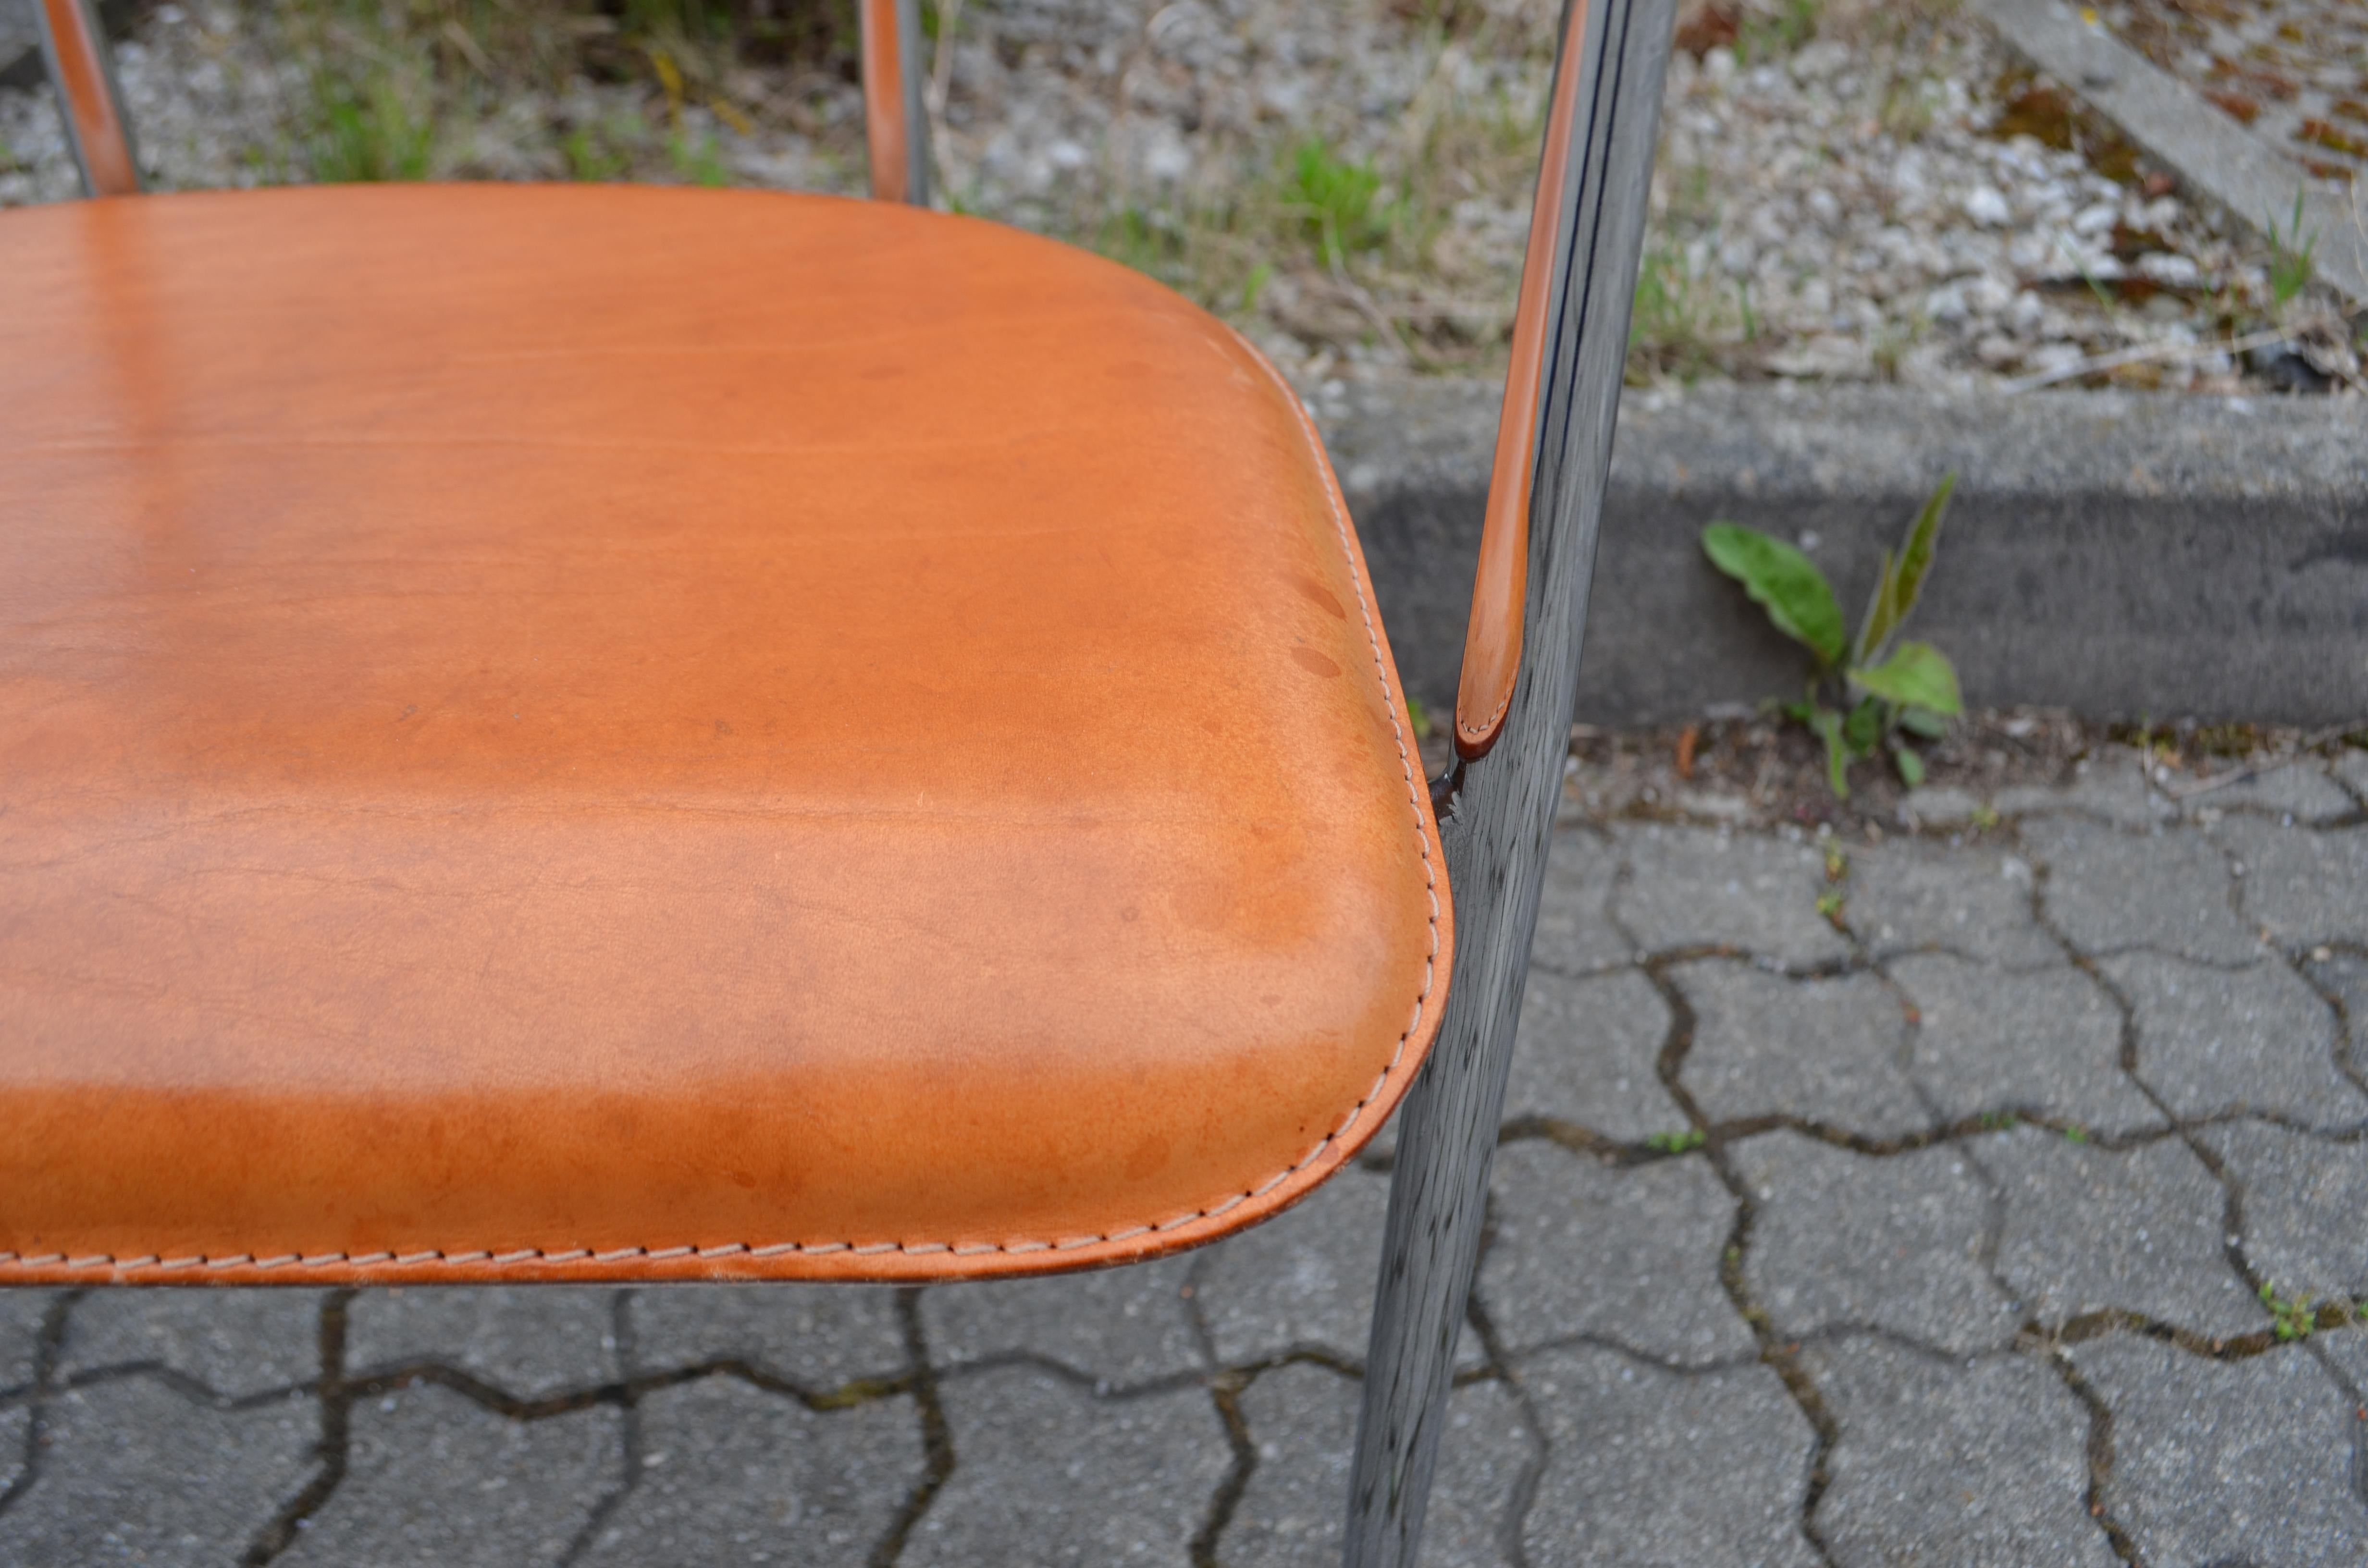 Fasem Vintage Cognac Vegetal Leather Chair P40 by Vegni & Gualtierotti  In Good Condition For Sale In Munich, Bavaria